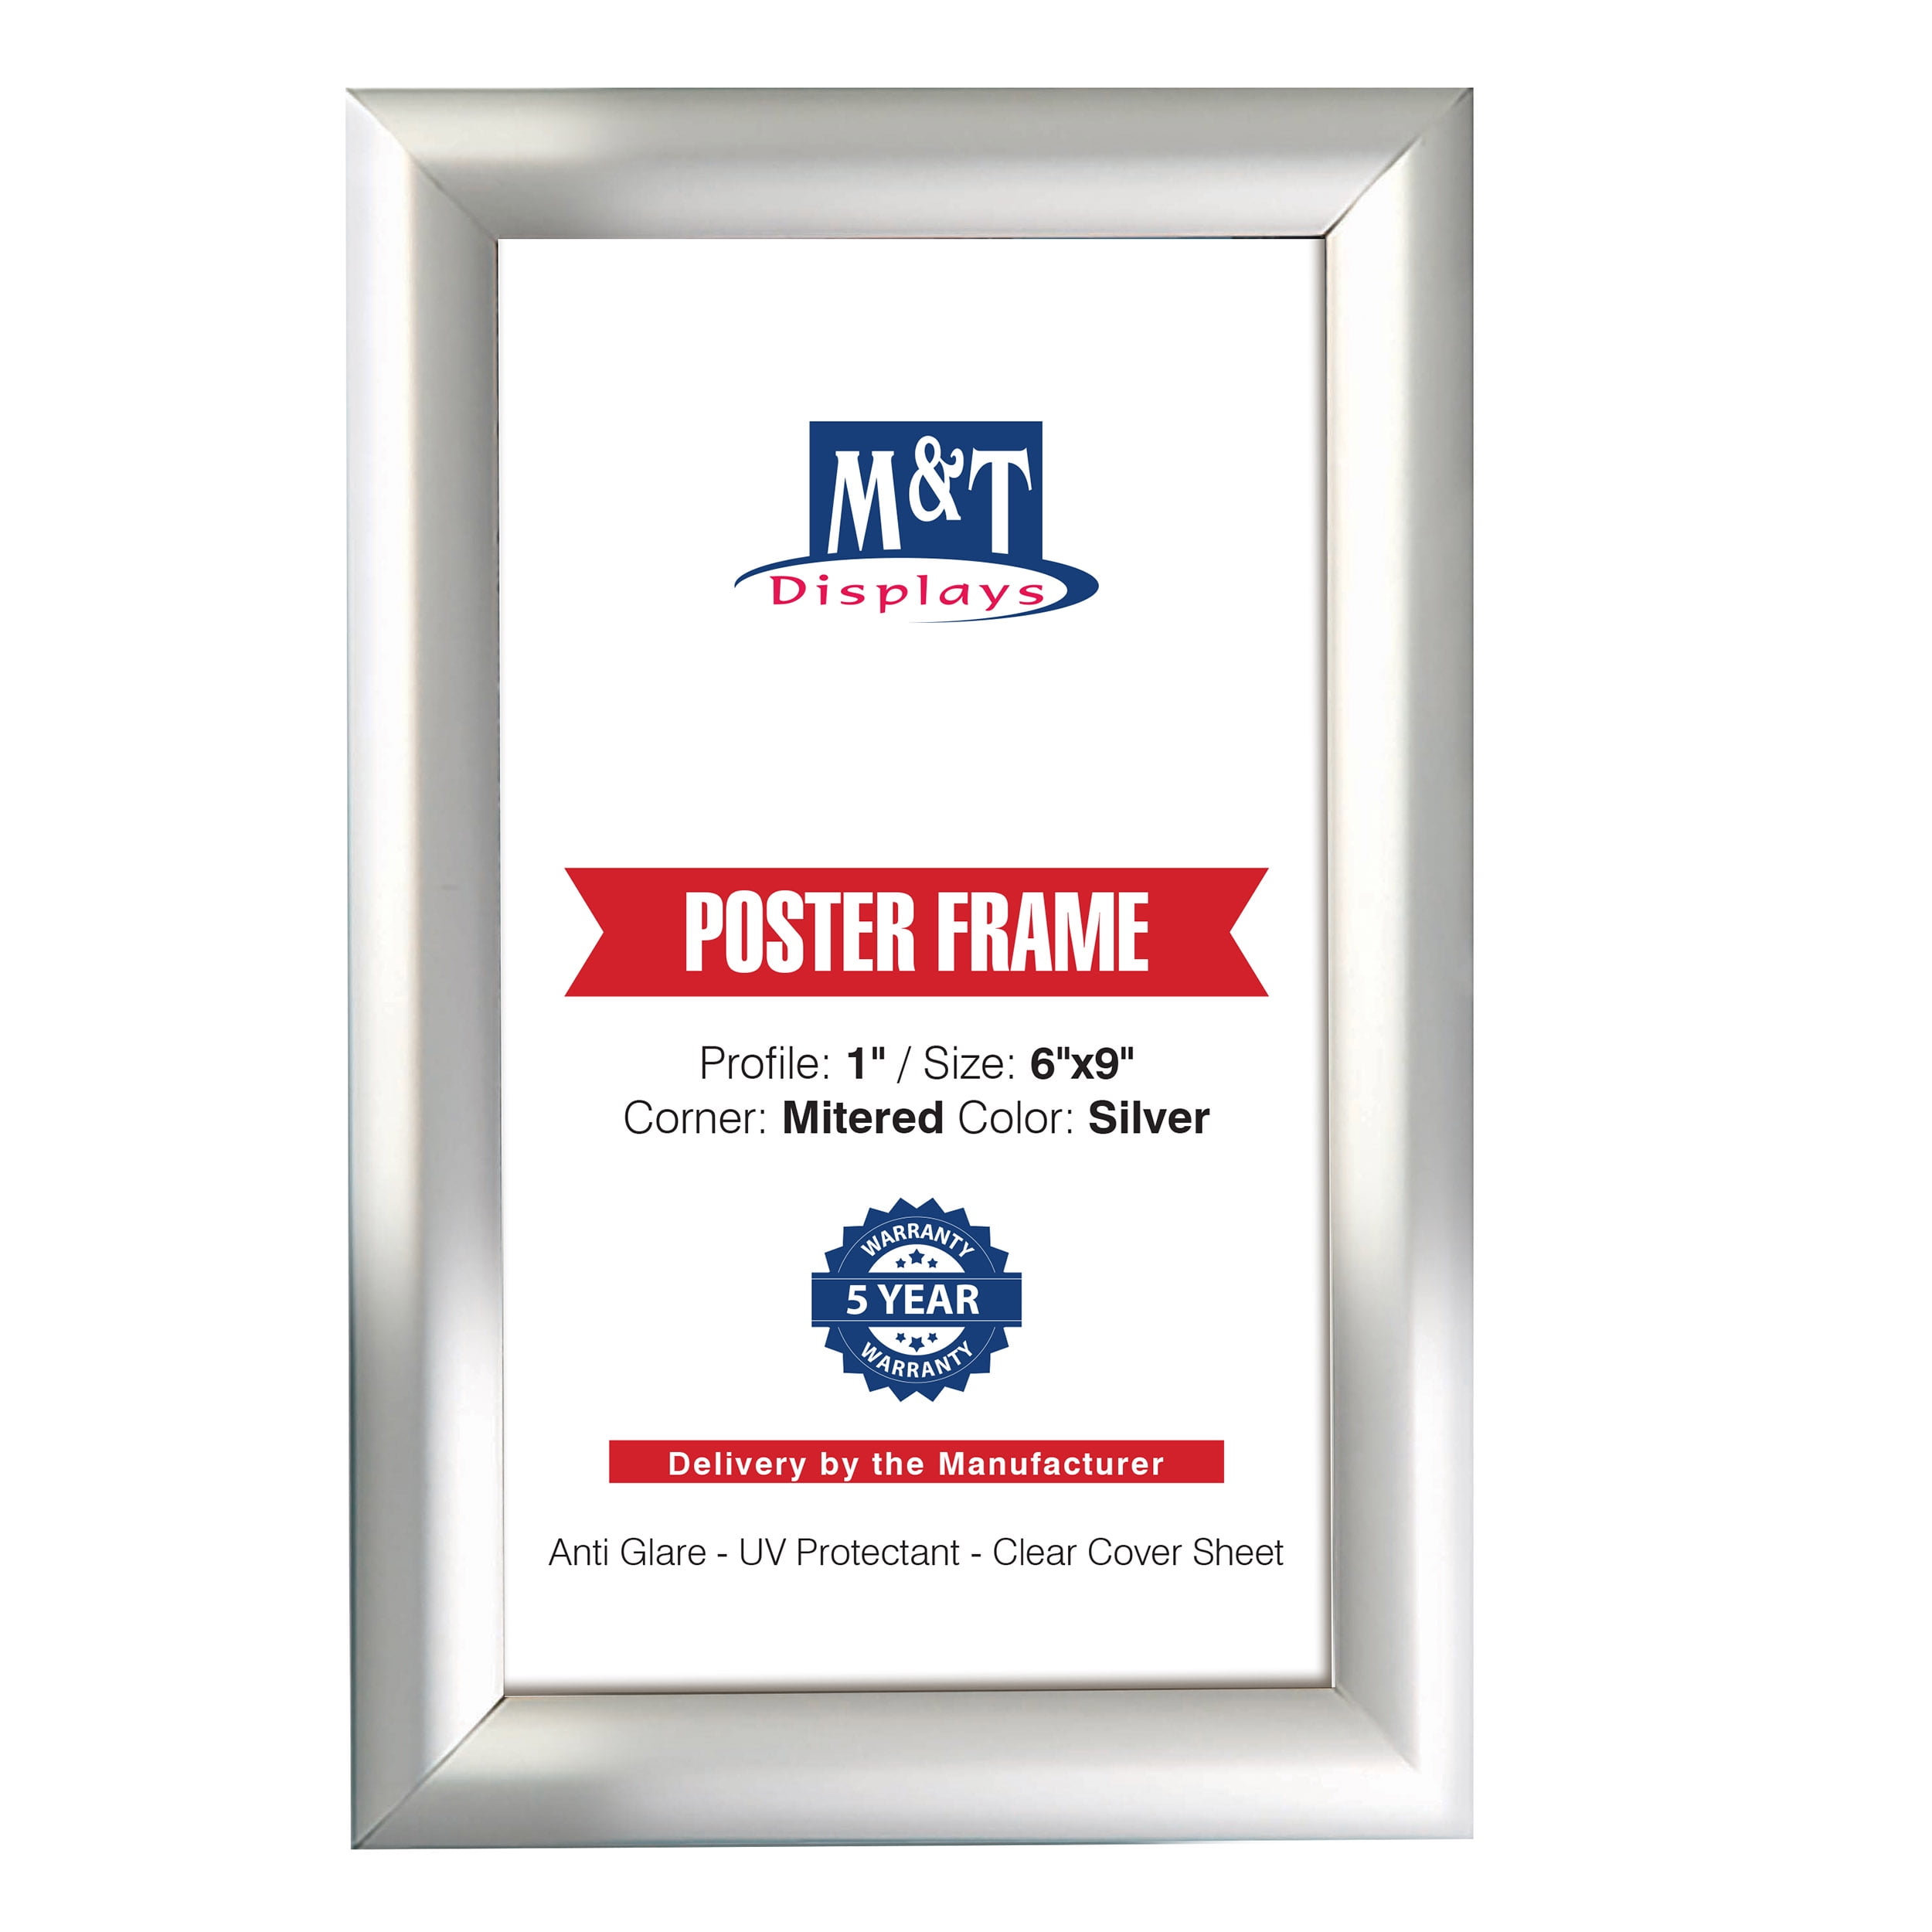 Document or Certificate with Mitred Corner M&T Displays Silver 22x28 Poster Frame 1 inch Aluminum Profile Front Loading Wall Mounting Snap Frame Display for Picture 